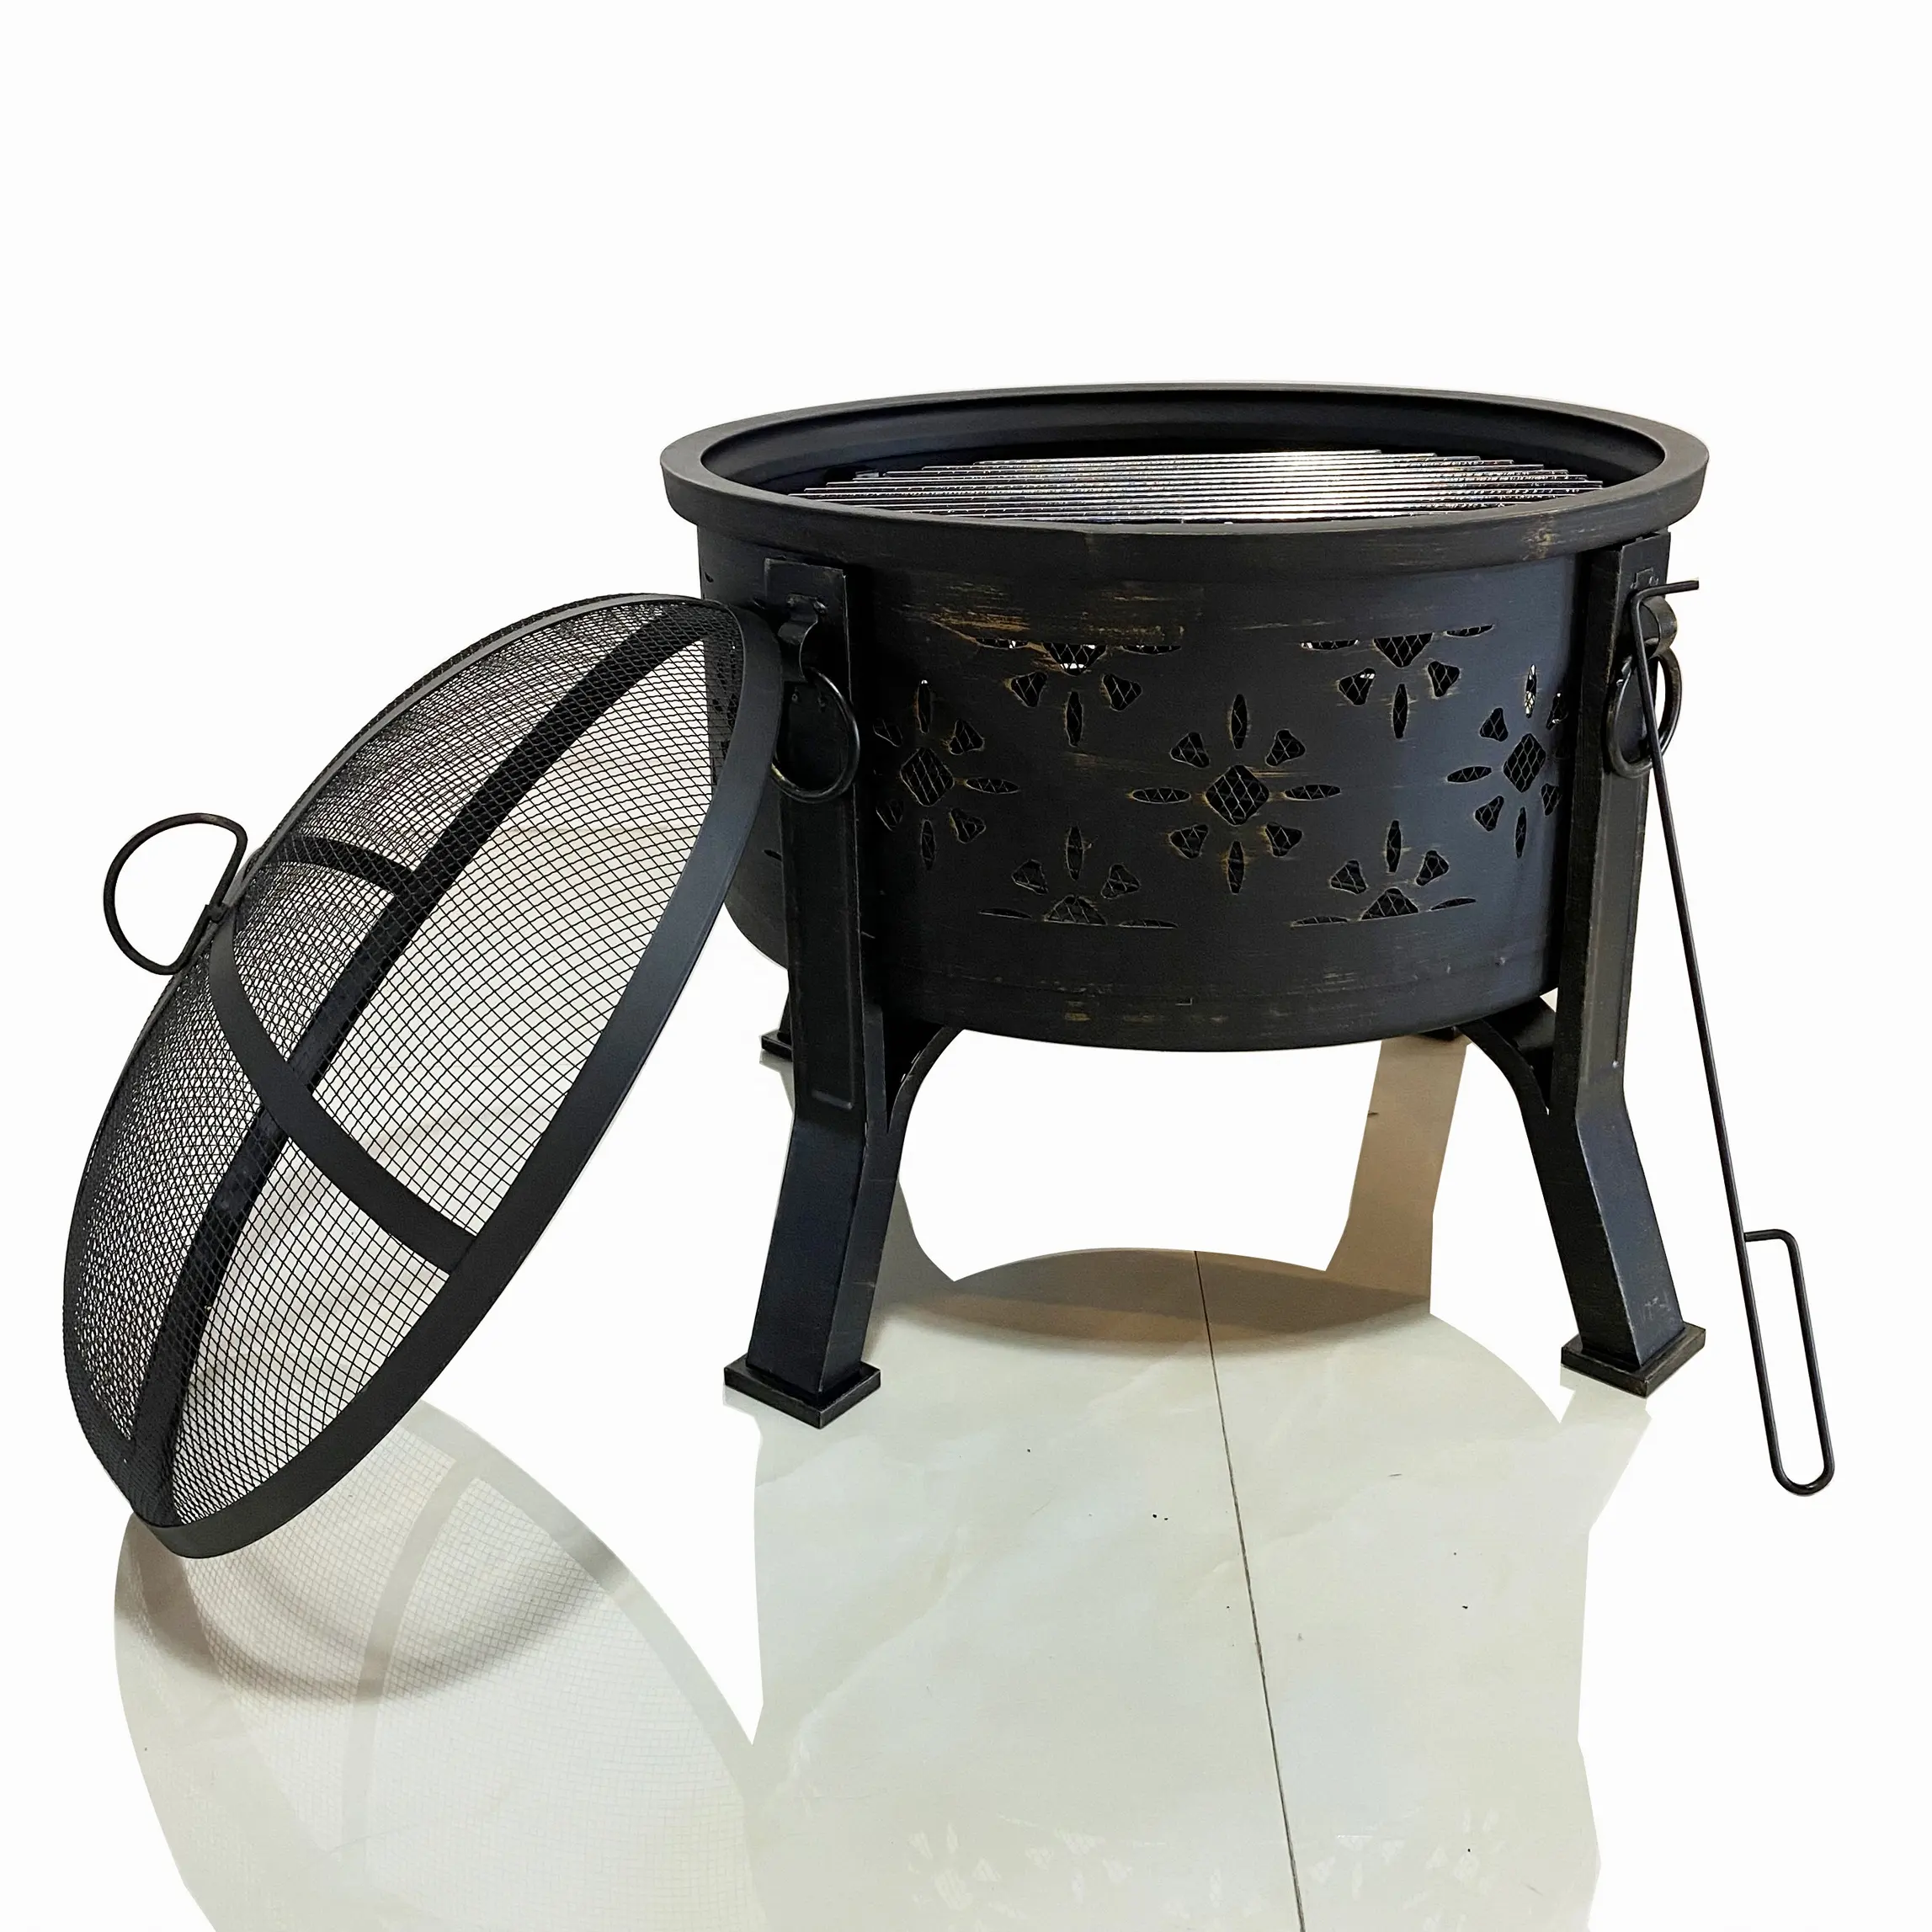 Carbon Steel fire bowl outdoor fire pit for BBQ and Warmer